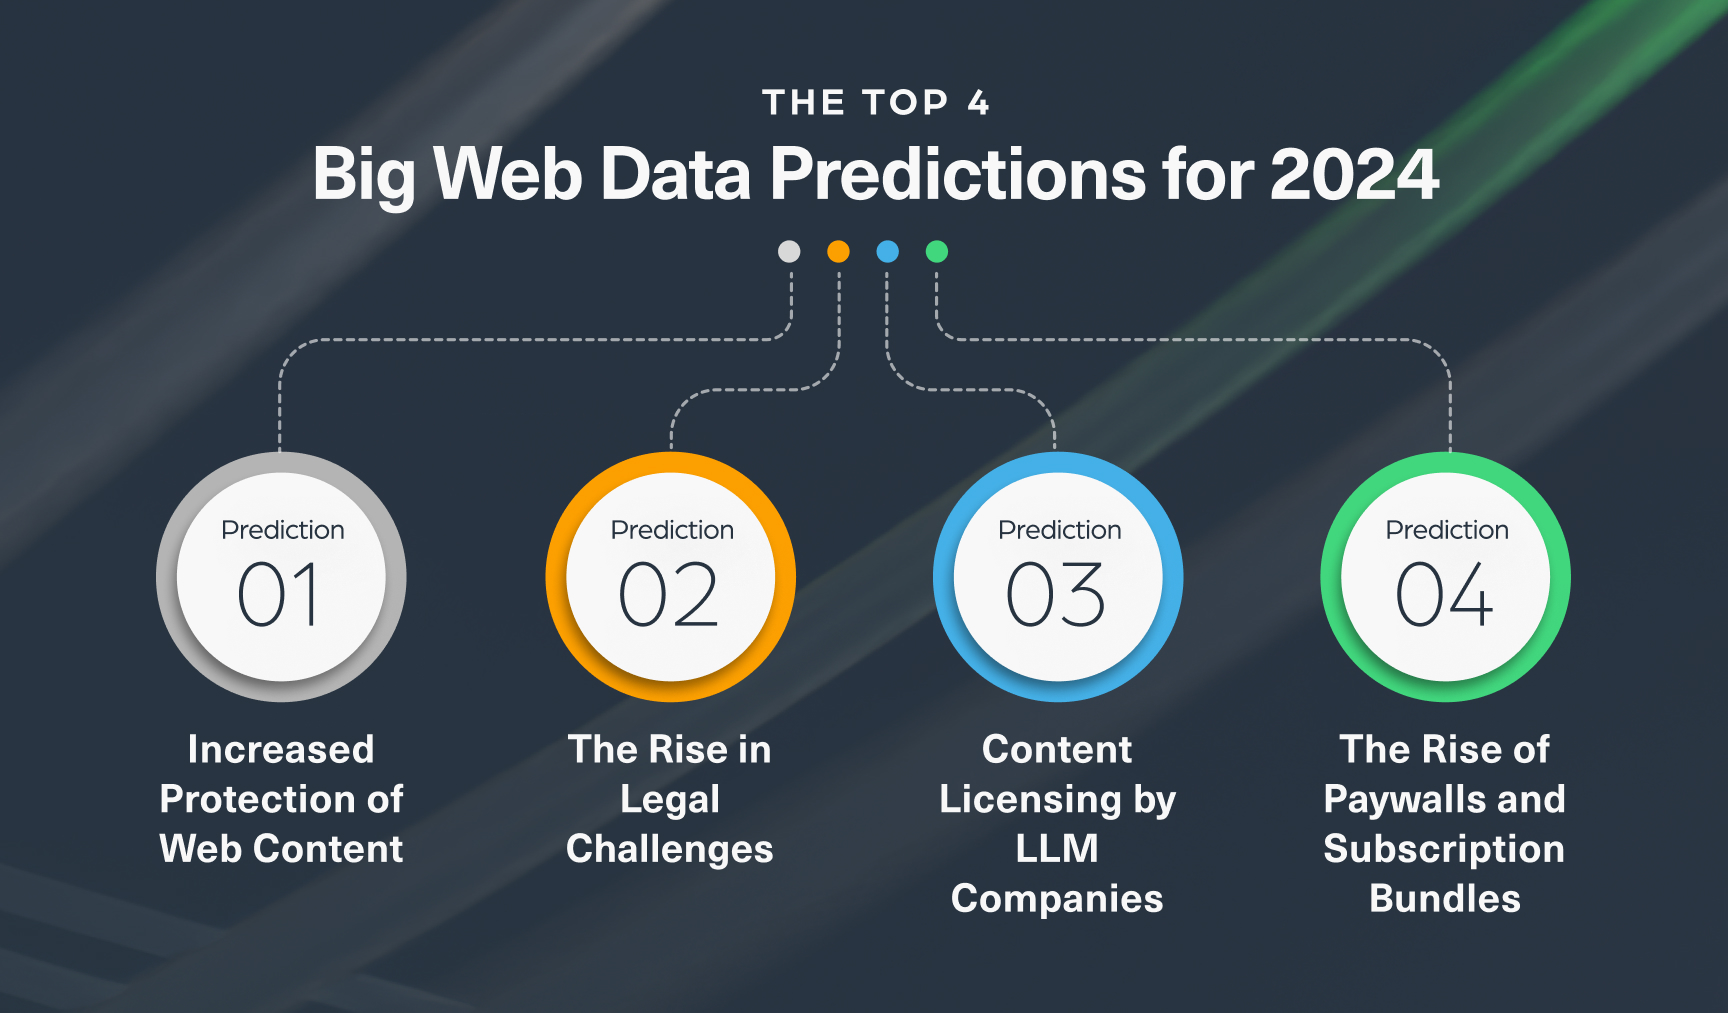 The top 4 big web data predictions for 2024